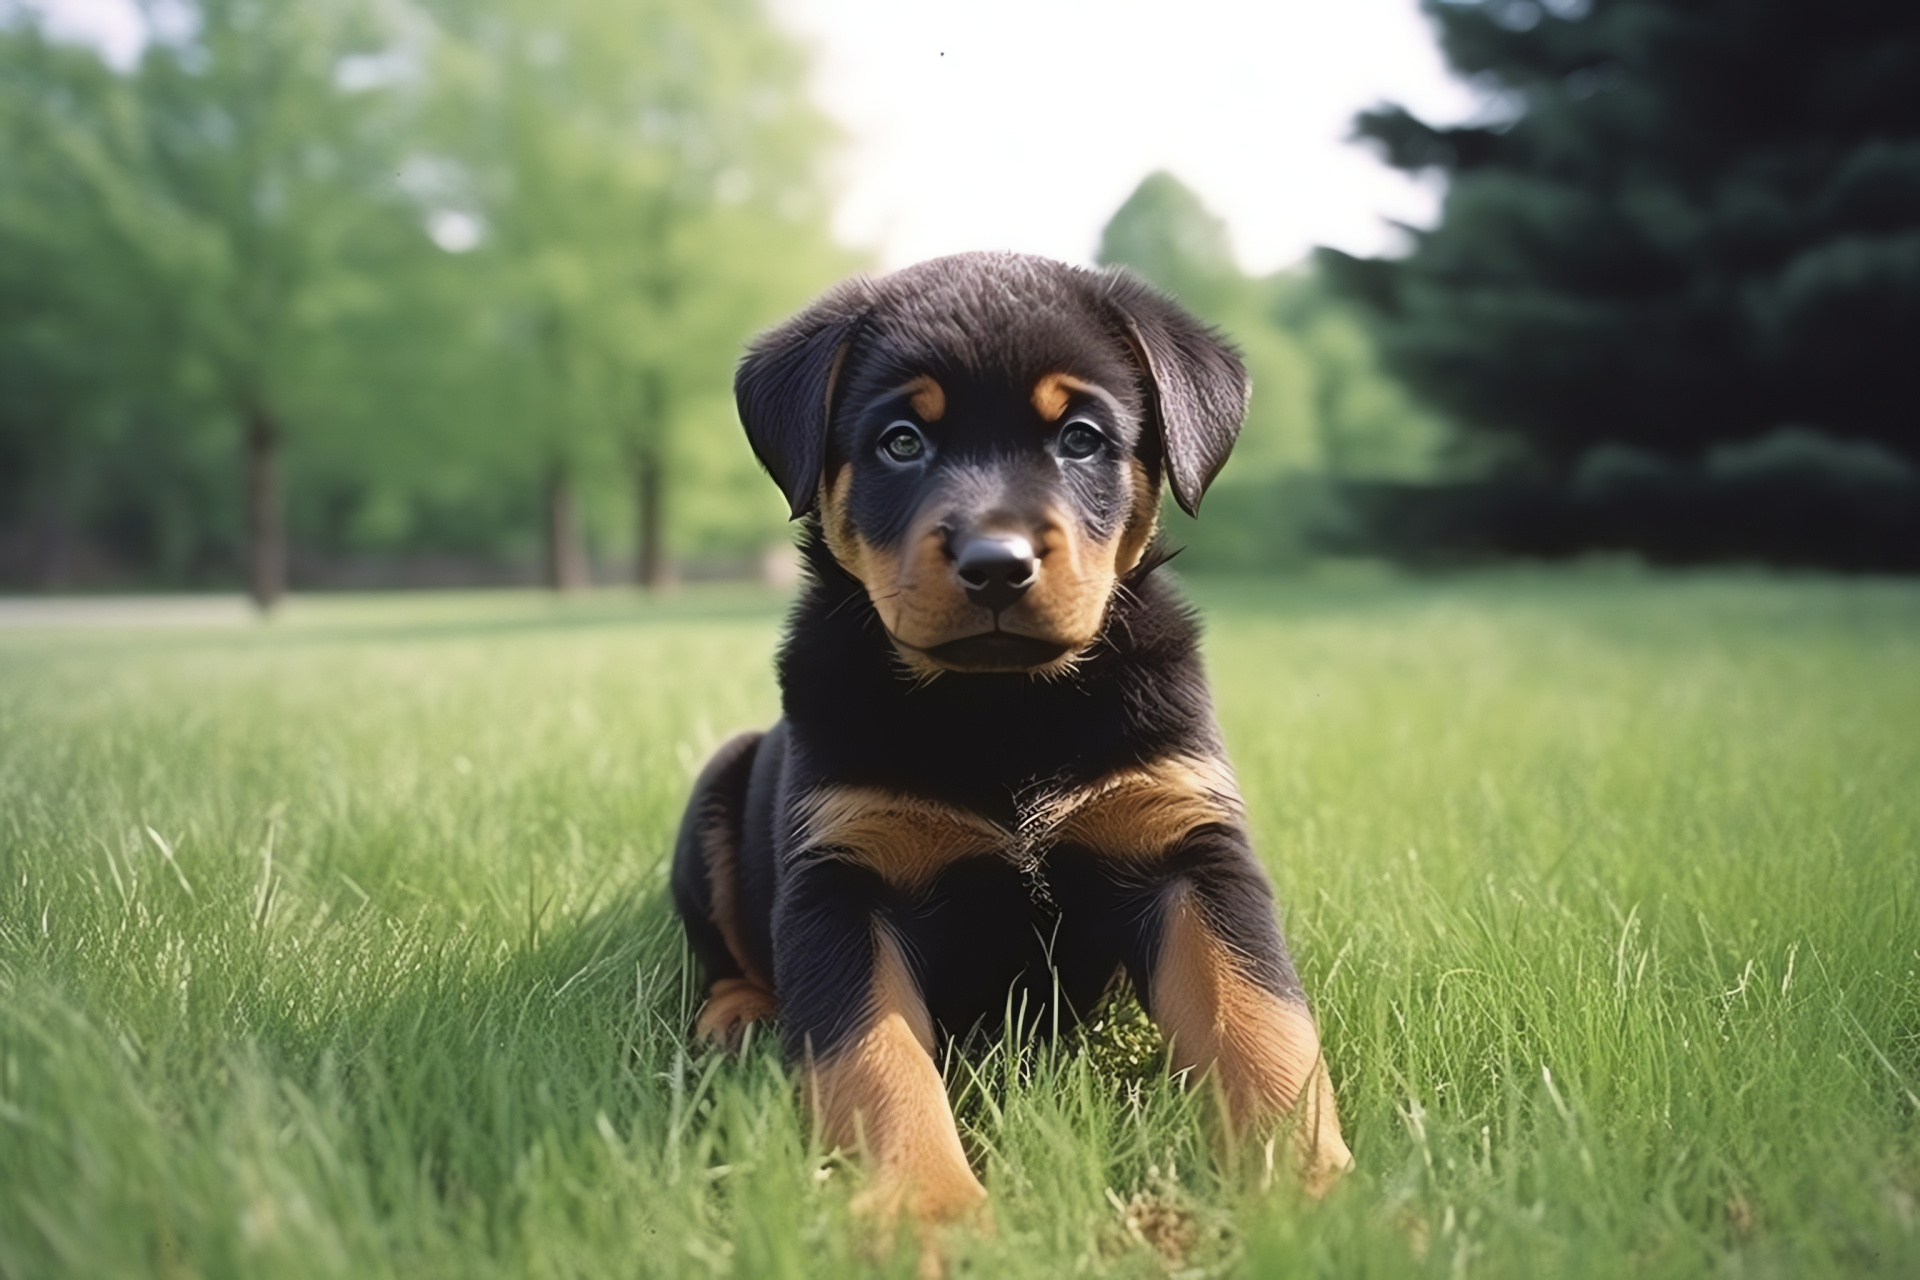 Youthful Rottweiler, playful stance, glossy coat, canine innocence, clear backdrop, HD Desktop Image